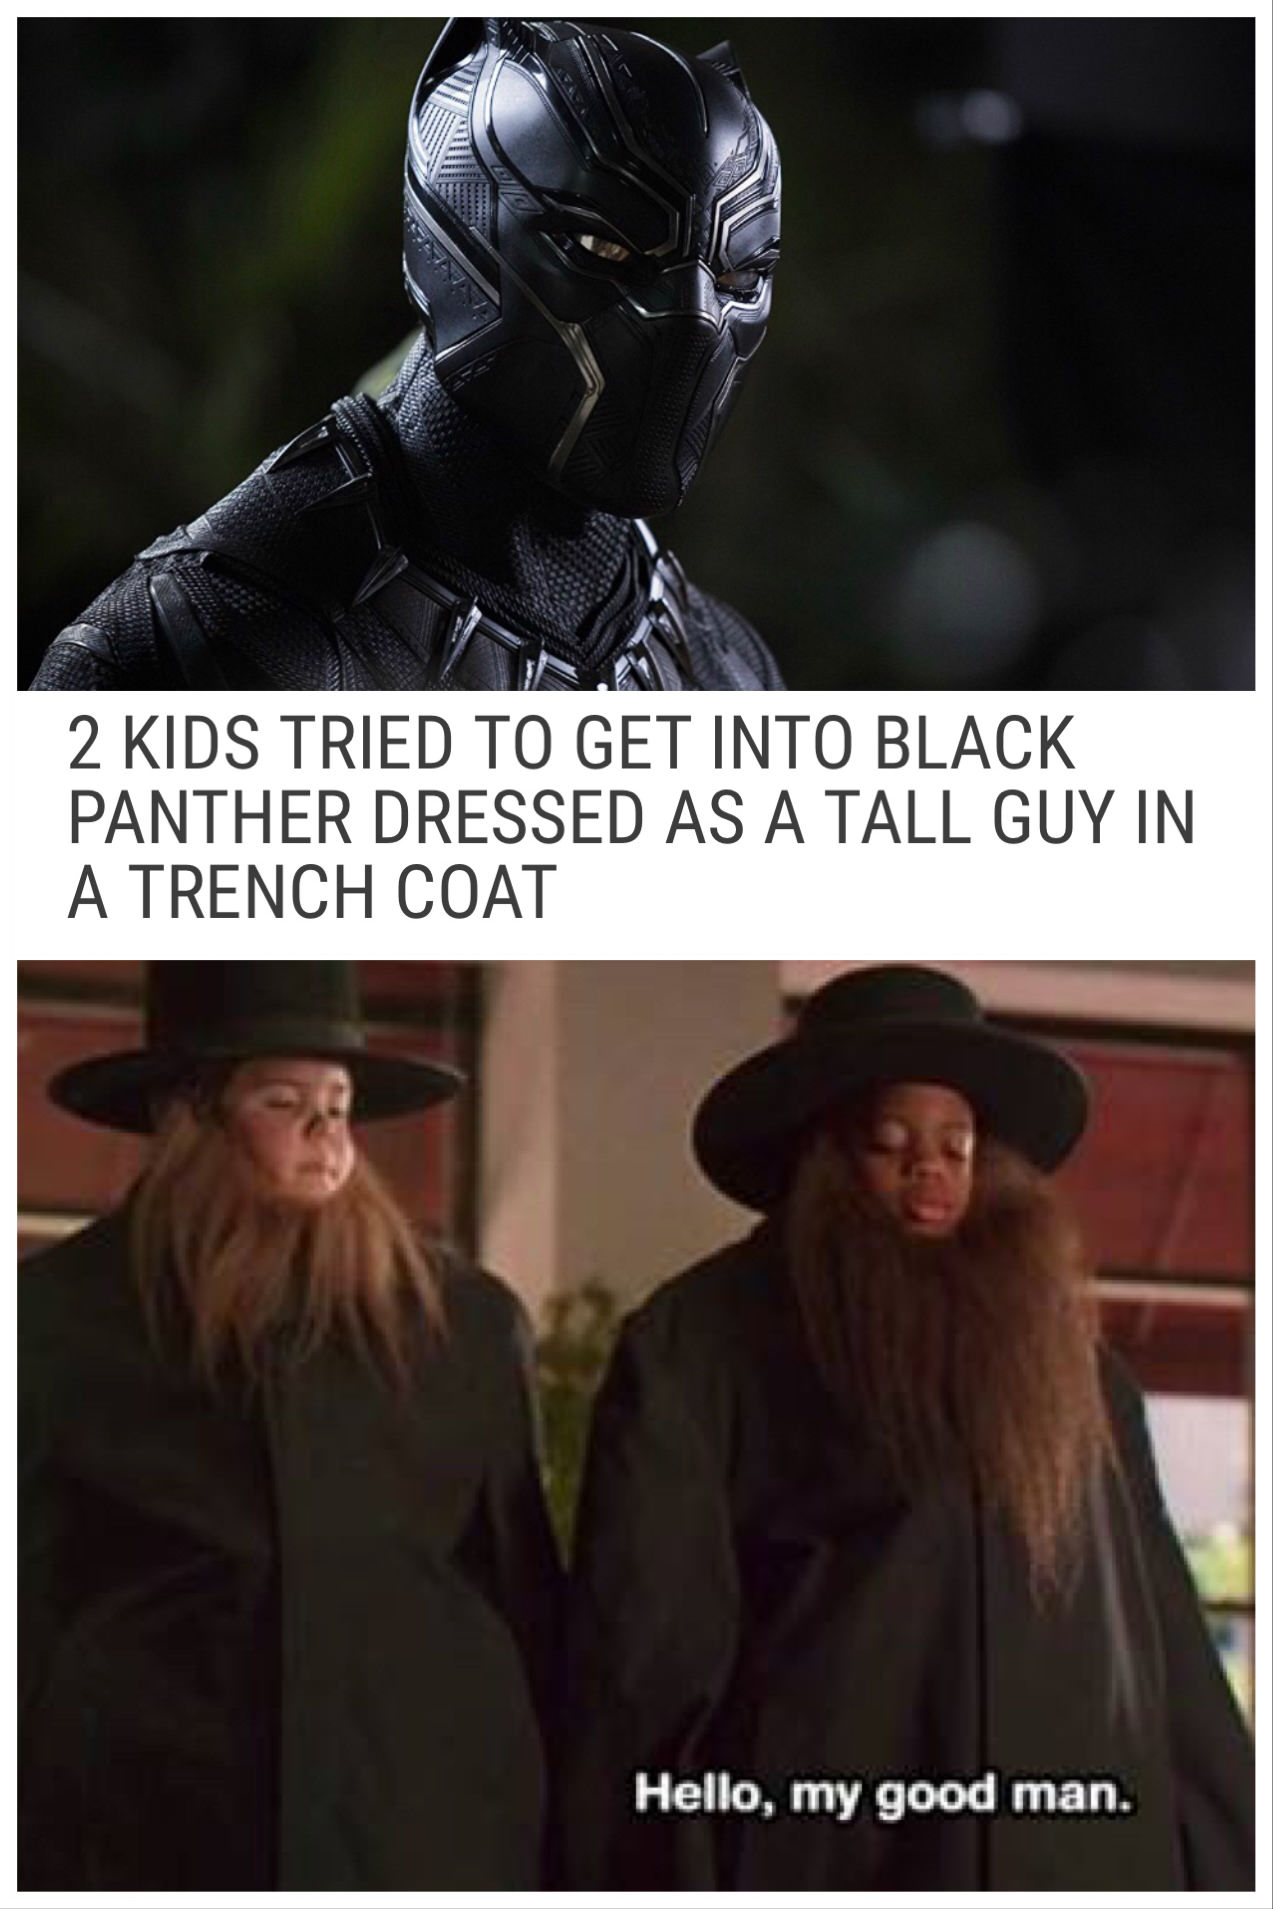 photo caption - 2 Kids Tried To Get Into Black Panther Dressed As A Tall Guy In A Trench Coat Hello, my good man.